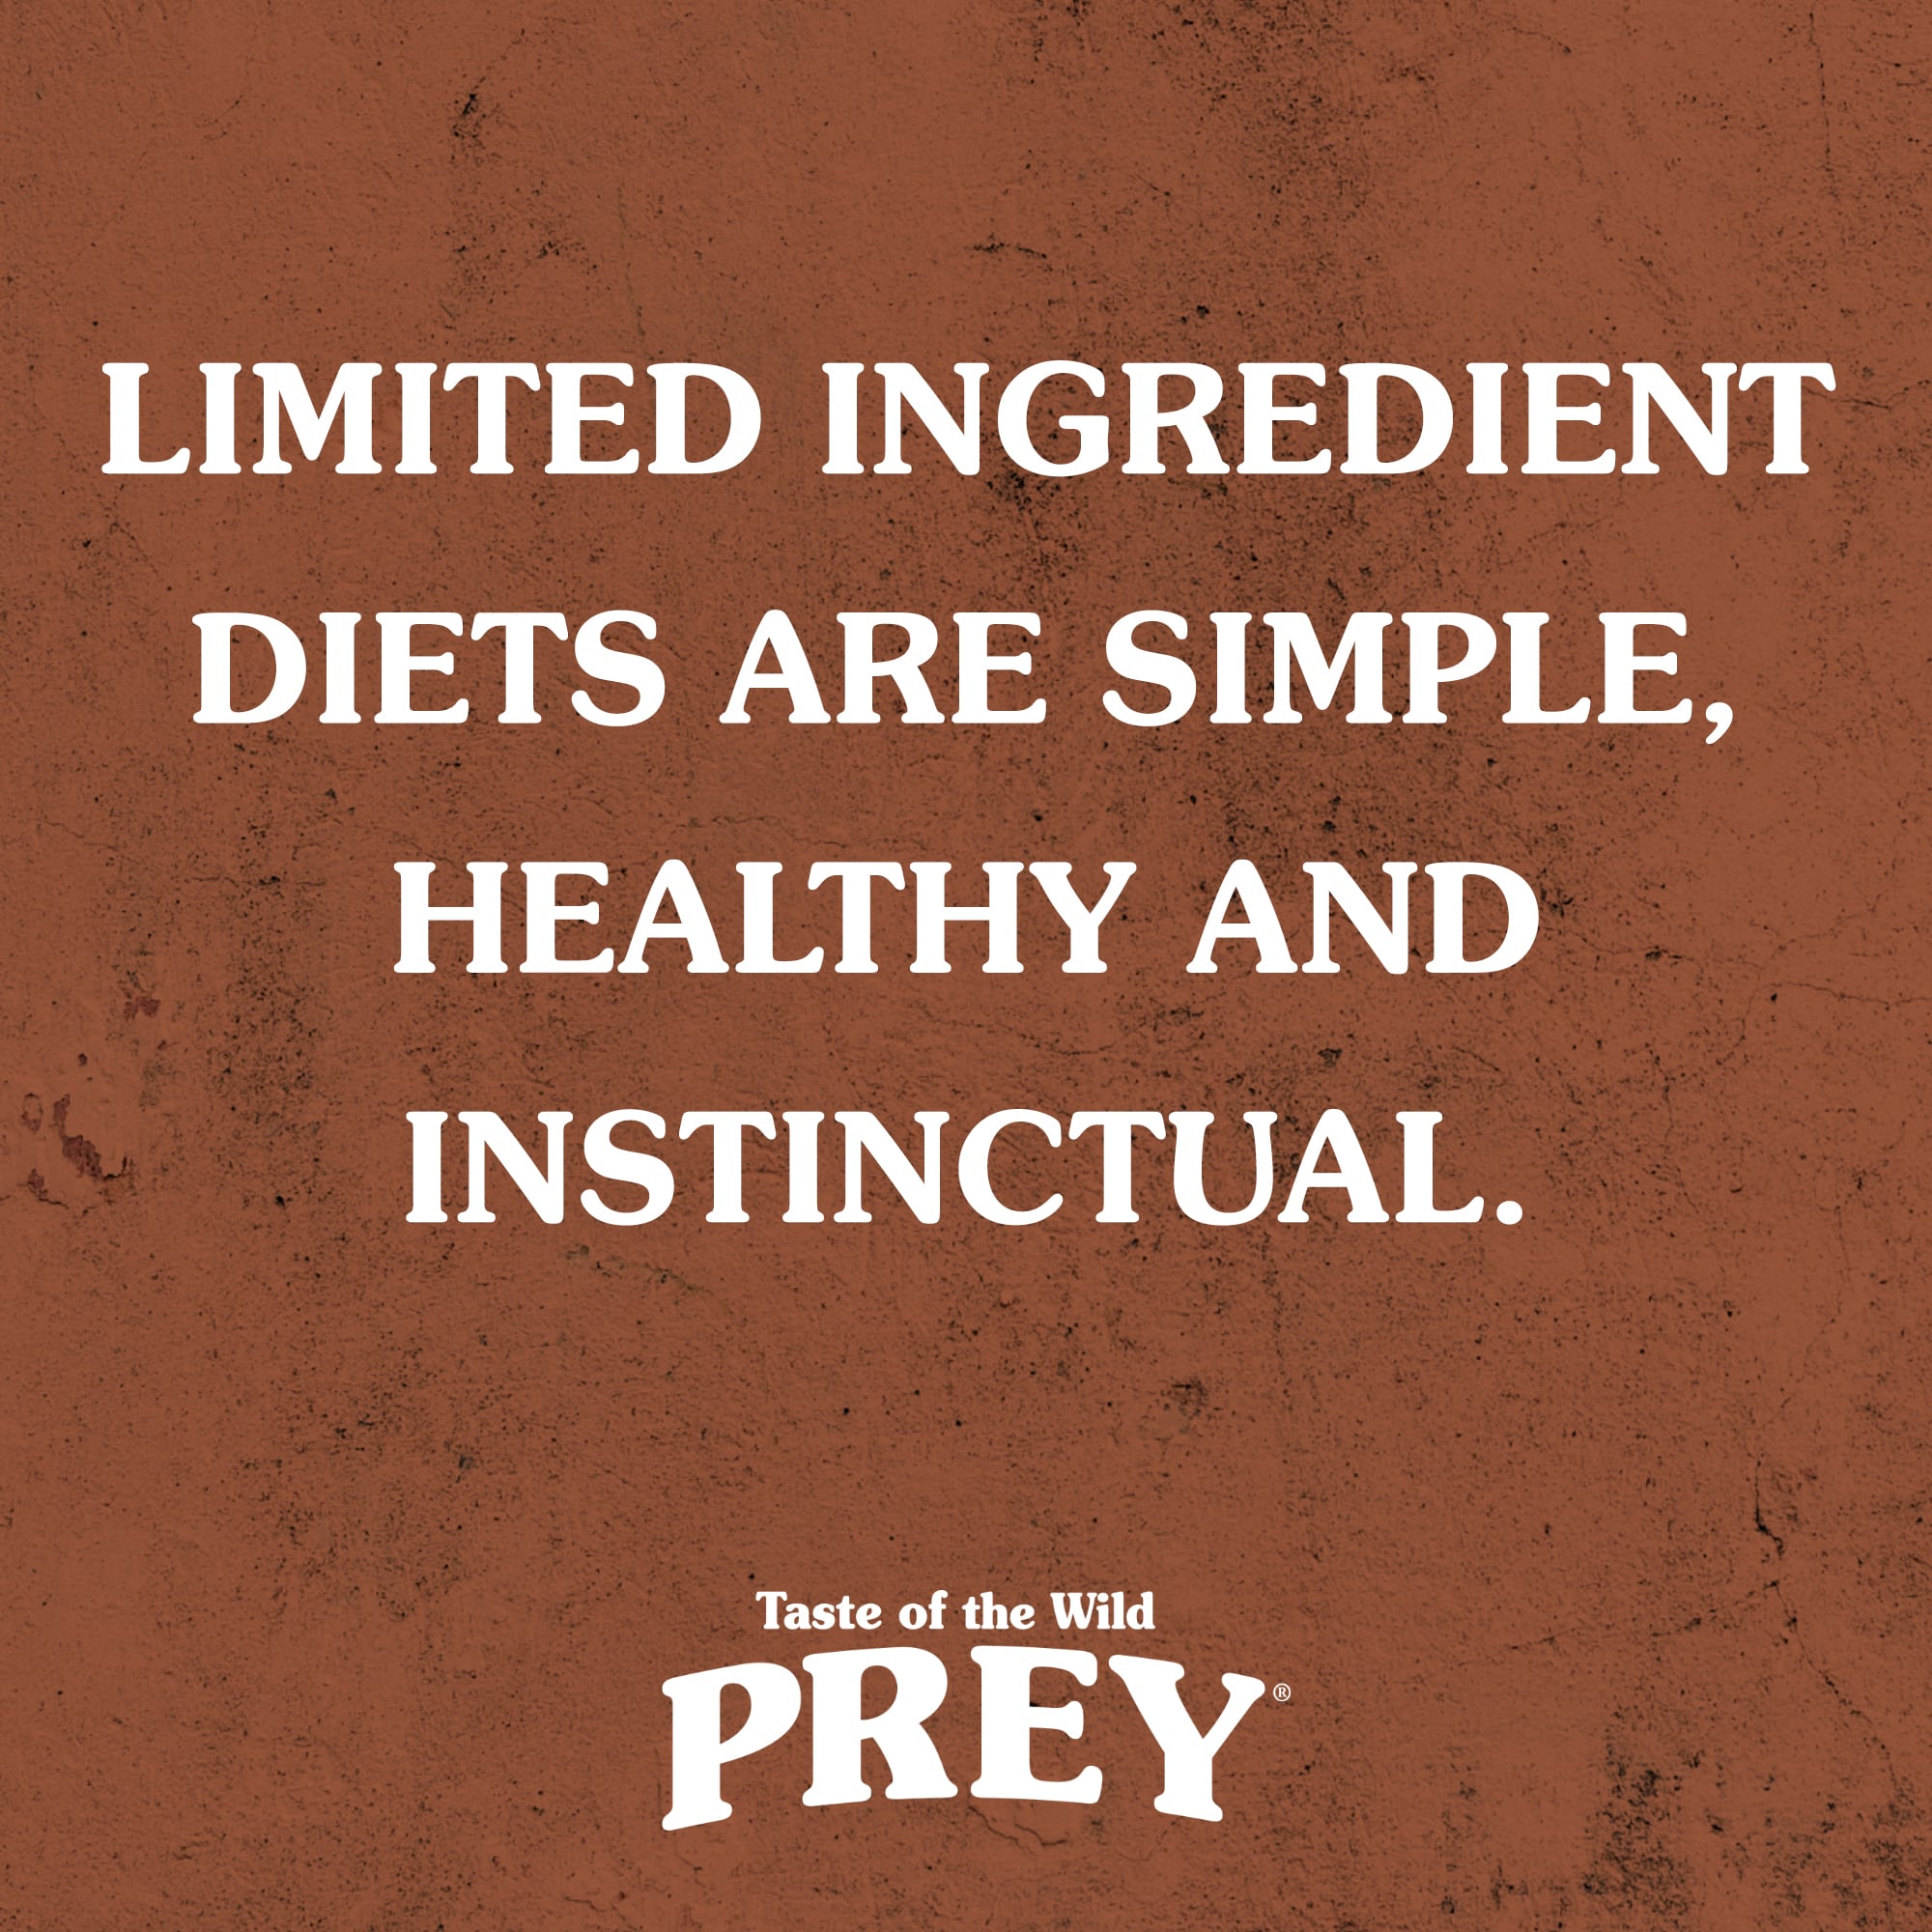 Limited-Ingredient Diets Are Simple, Healthy and Instinctual.